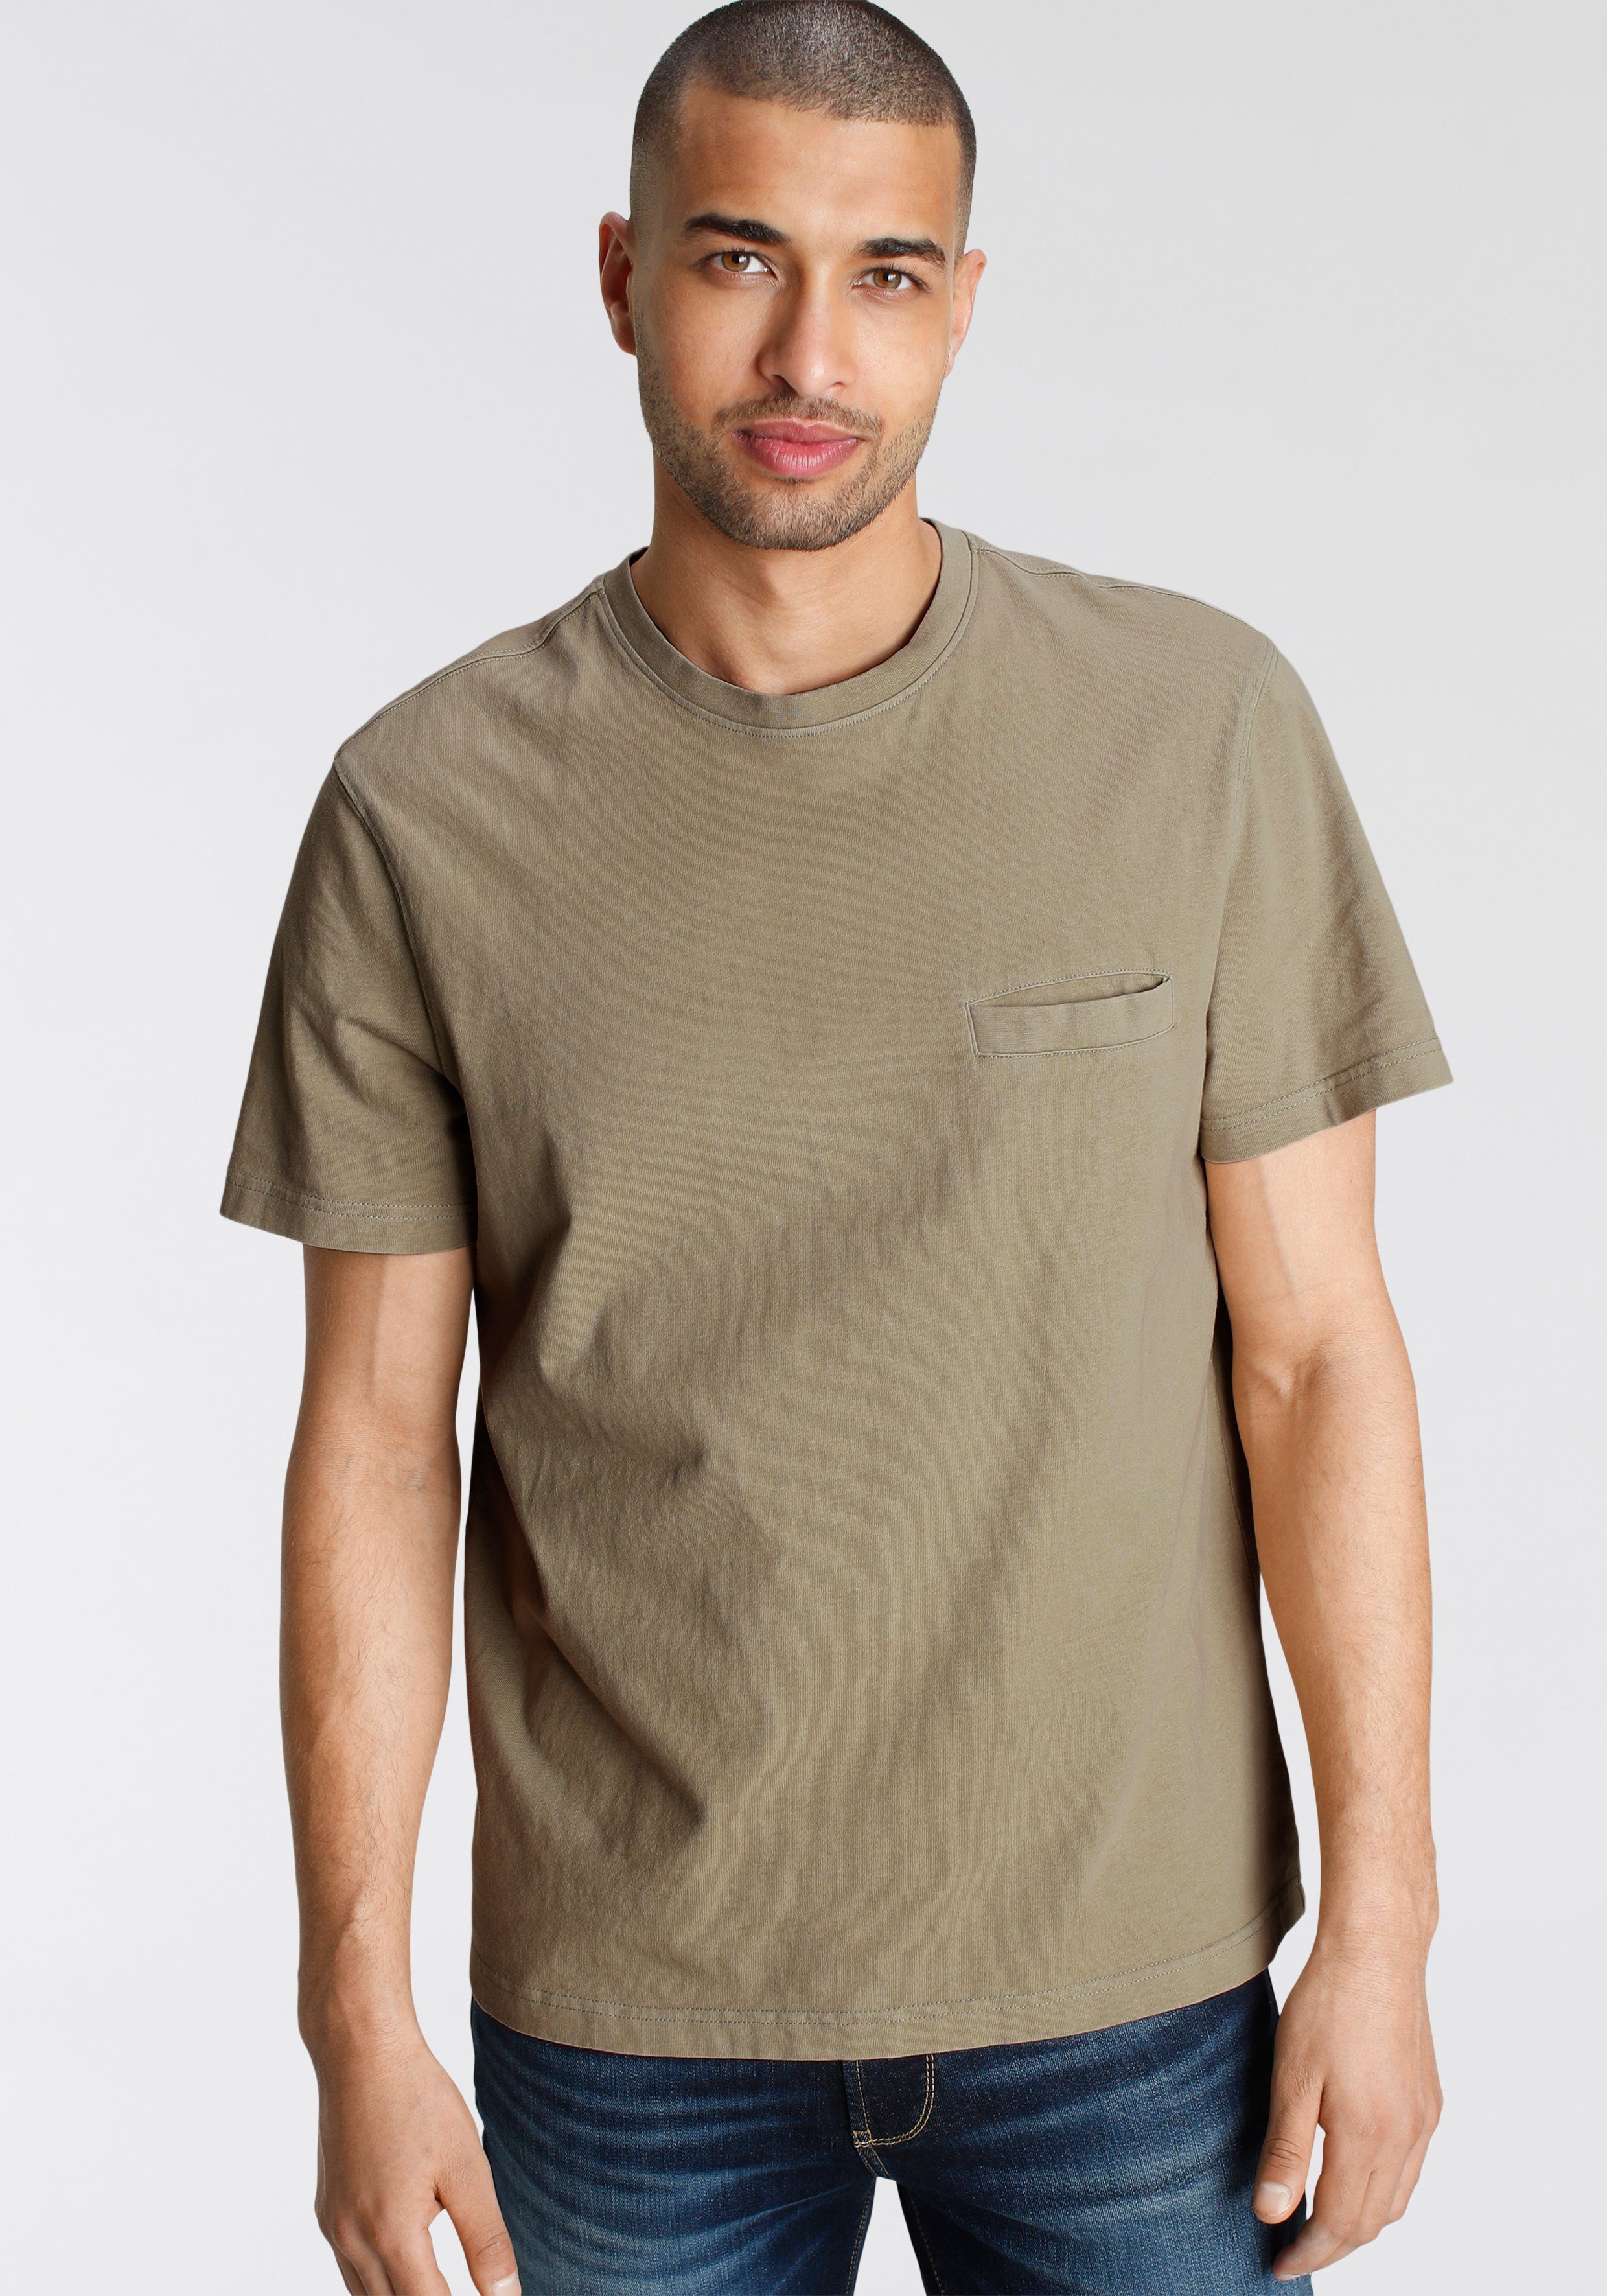 oliv T-Shirt OTTO products